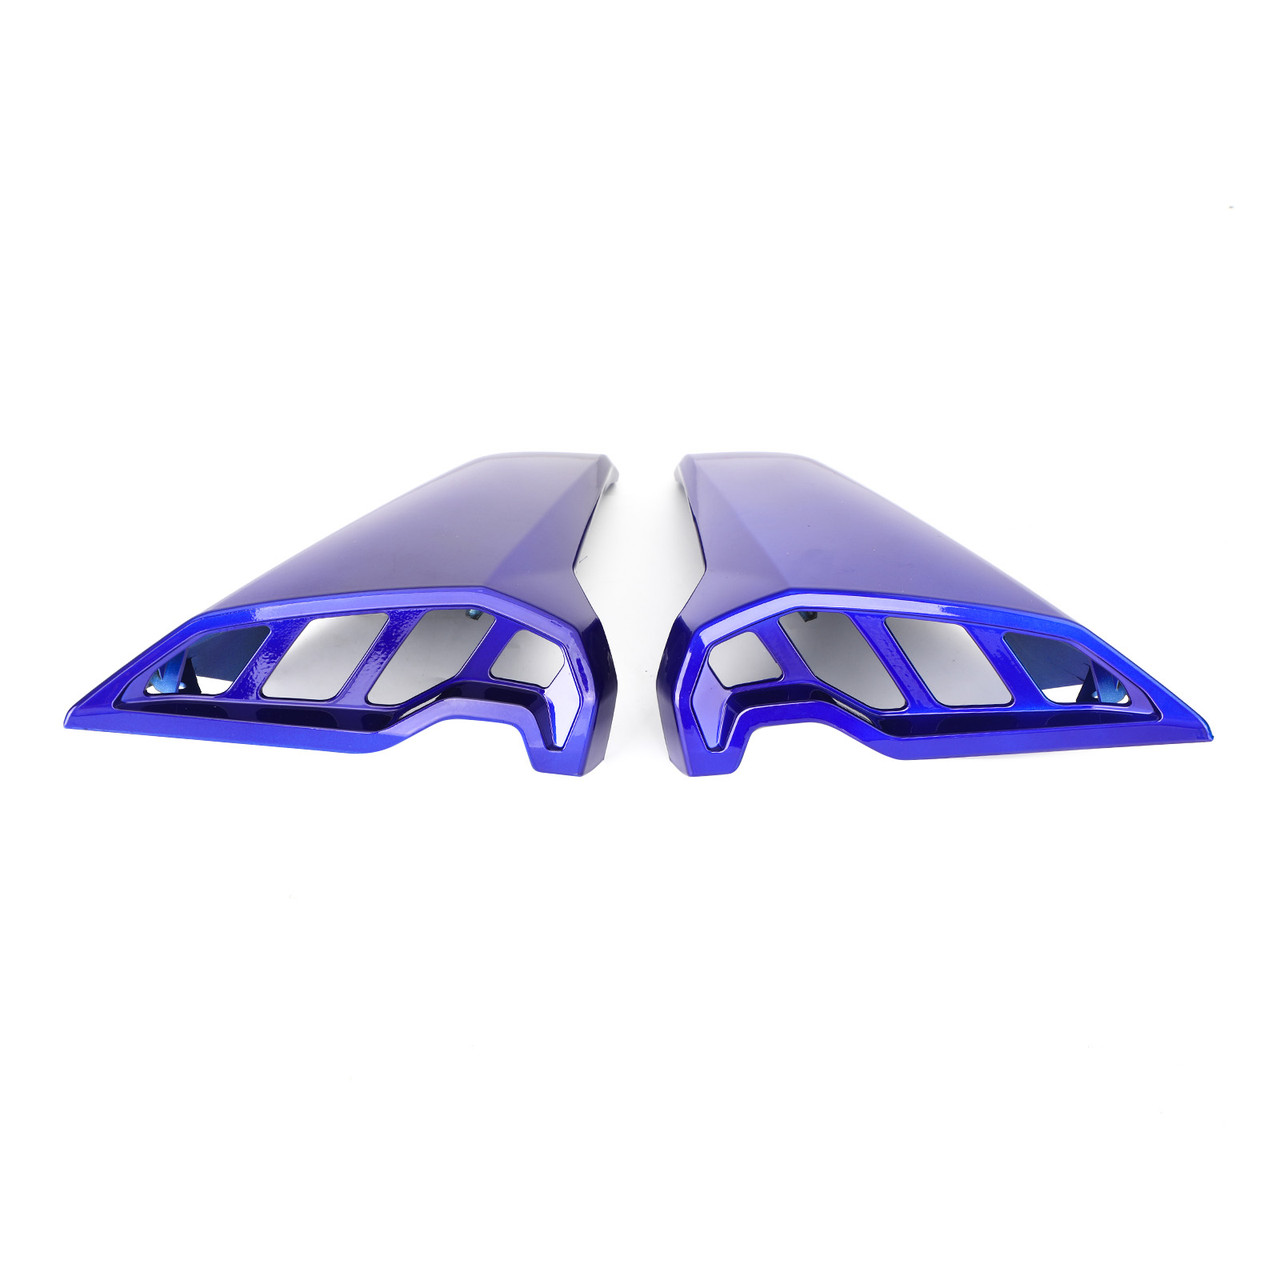 Air Intake Inlet Ram Tube Scoop Covers Fit for Yamaha MT09 MT-09 FZ09 FZ-09 2017-2020 Blue